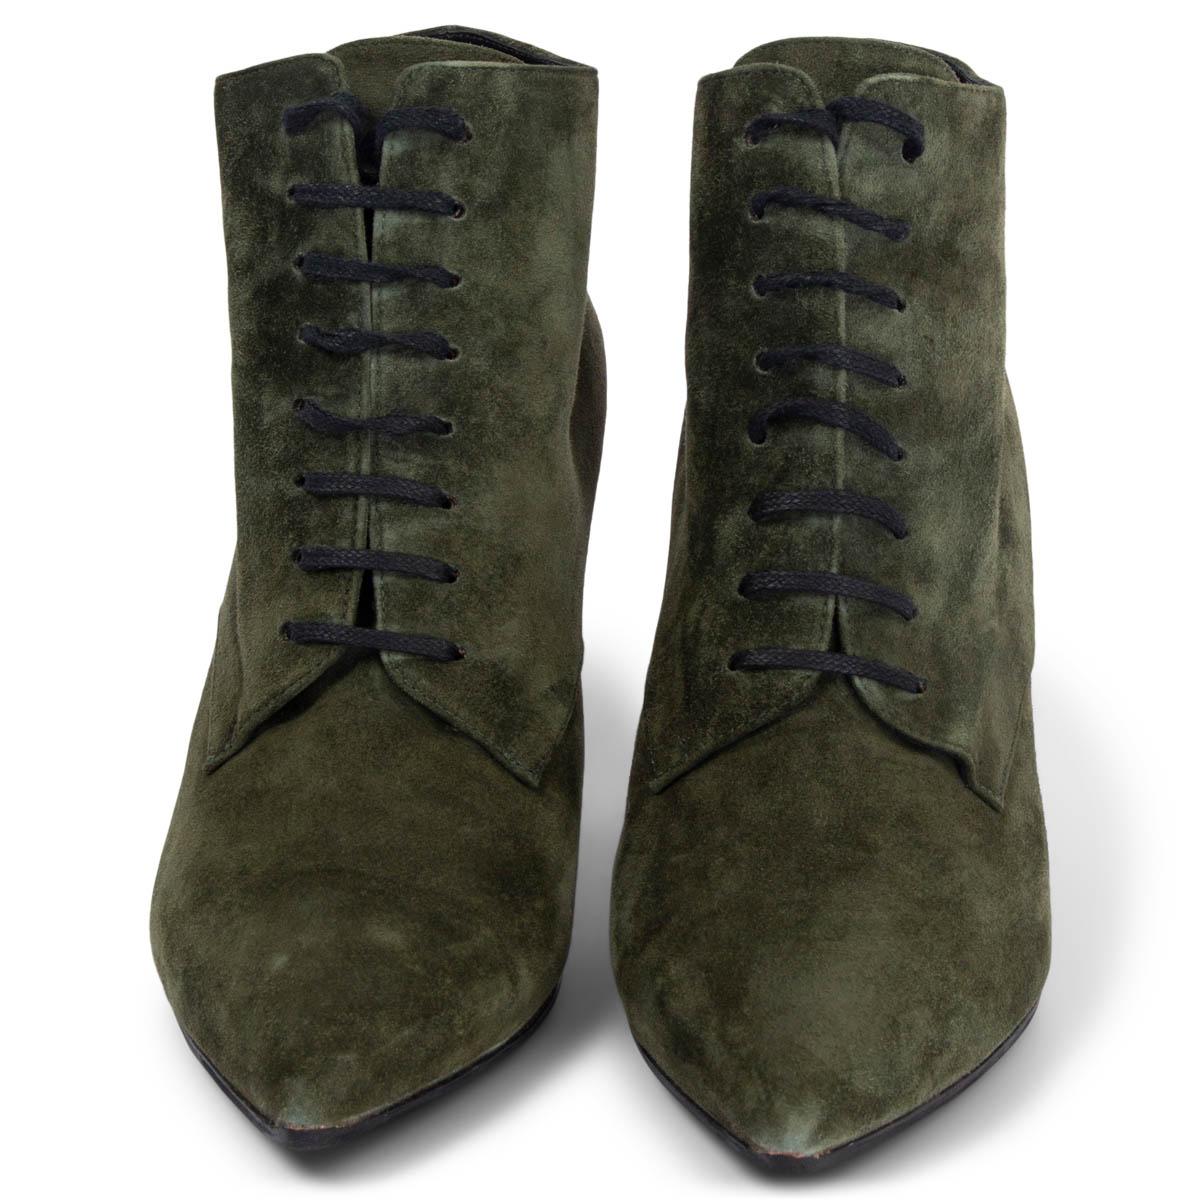 100% authentic Saint Laurent Era 85 lace-up booties in Cachemere Military (green) suede with a smooth black leather heel and a pointed-toe. Have been worn and shows some dents on the heels and soft scratches on the suede. Overall in very good